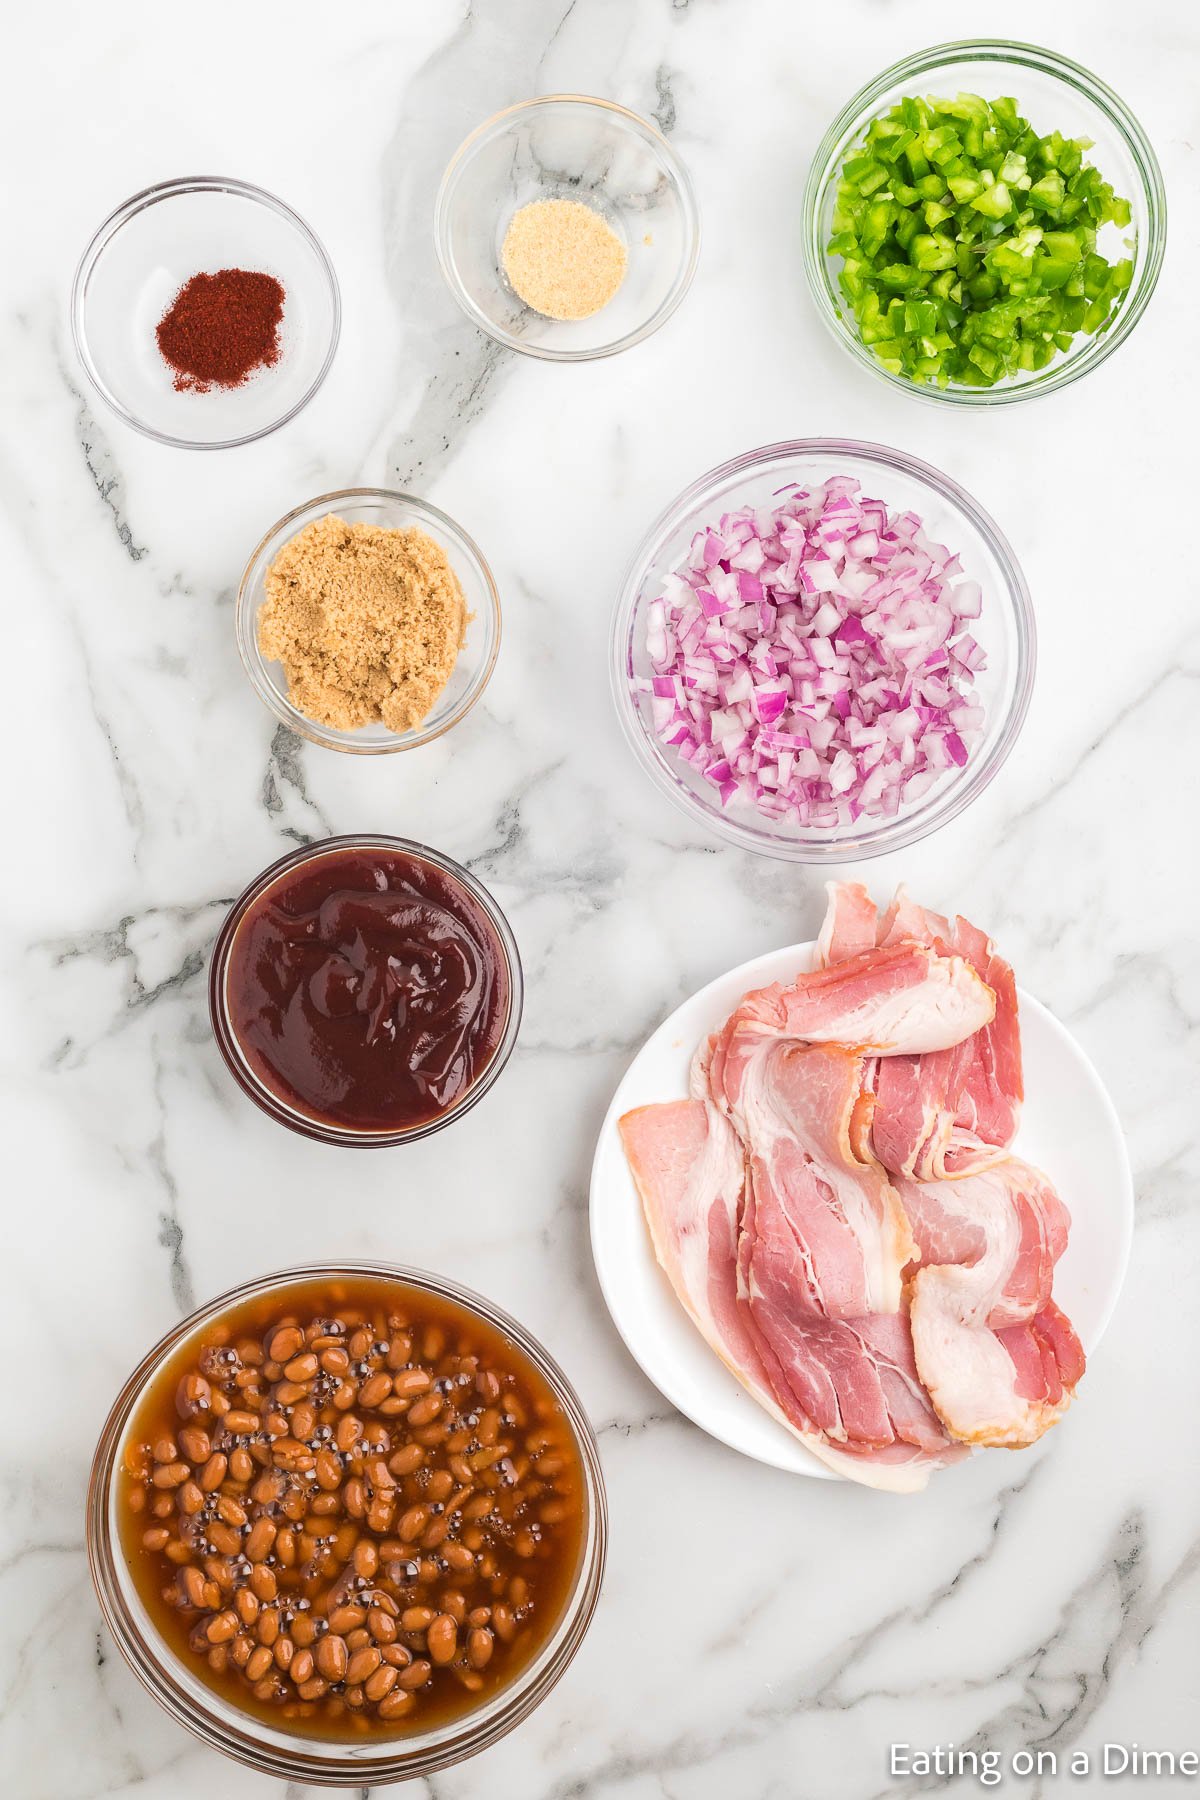 Baked Beans Ingredients - baked beans, barbecue sauce, brown sugar, paprika, garlic powder, red onion, bell pepper, bacon